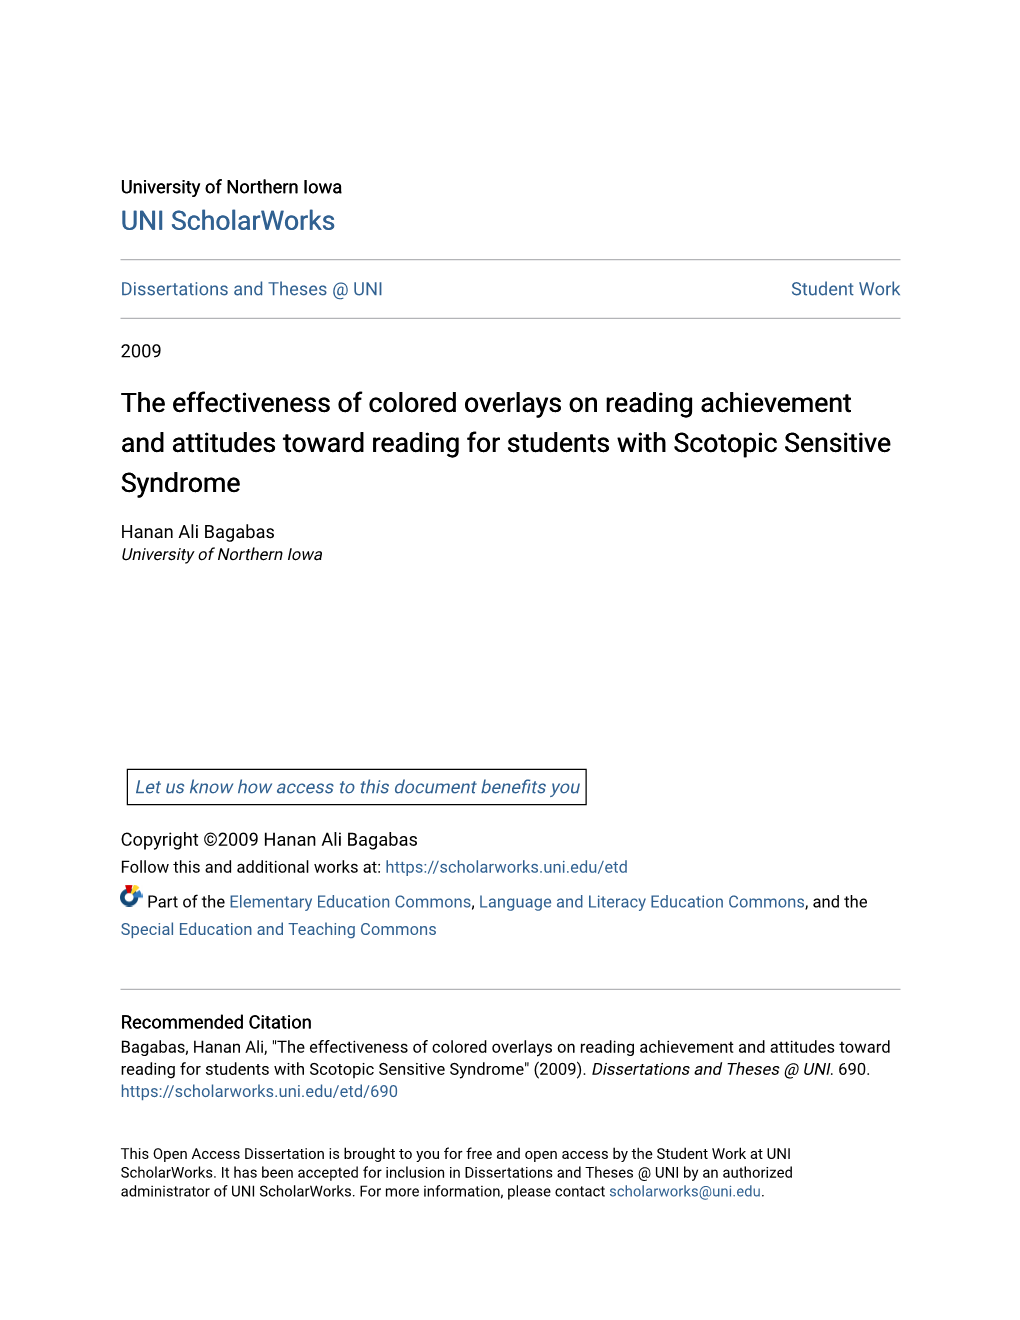 The Effectiveness of Colored Overlays on Reading Achievement and Attitudes Toward Reading for Students with Scotopic Sensitive Syndrome